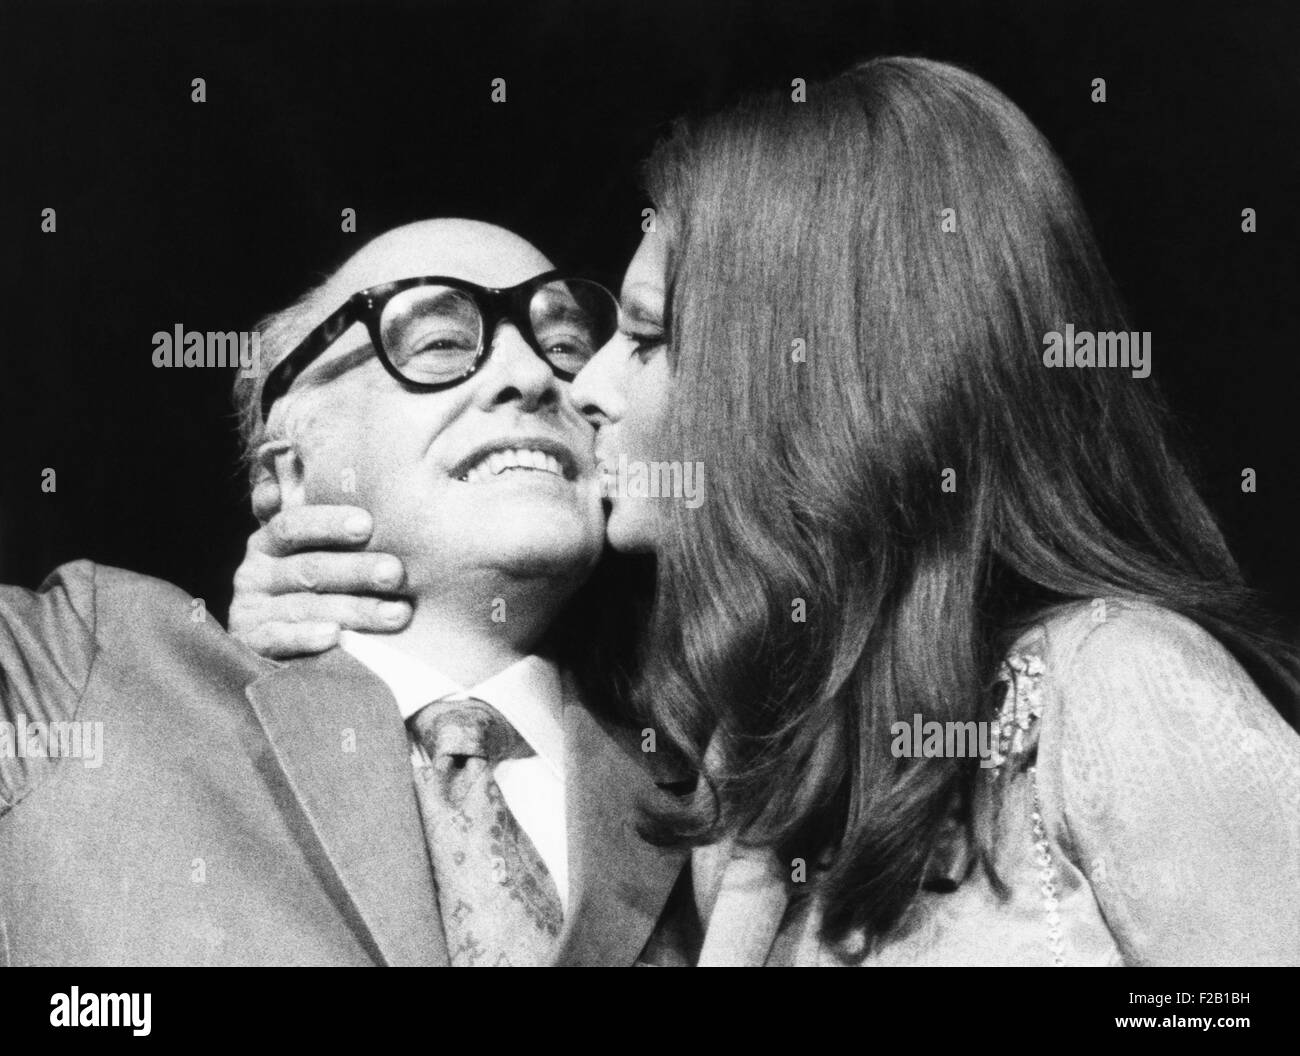 Sophia Loren gives her husband, film producer Carlo Ponti, a kiss at press conference. They were in New York to promote Sophia Loren's film SUNFLOWER, Sept. 24, 1970. (CSU 2015 8 613) Stock Photo